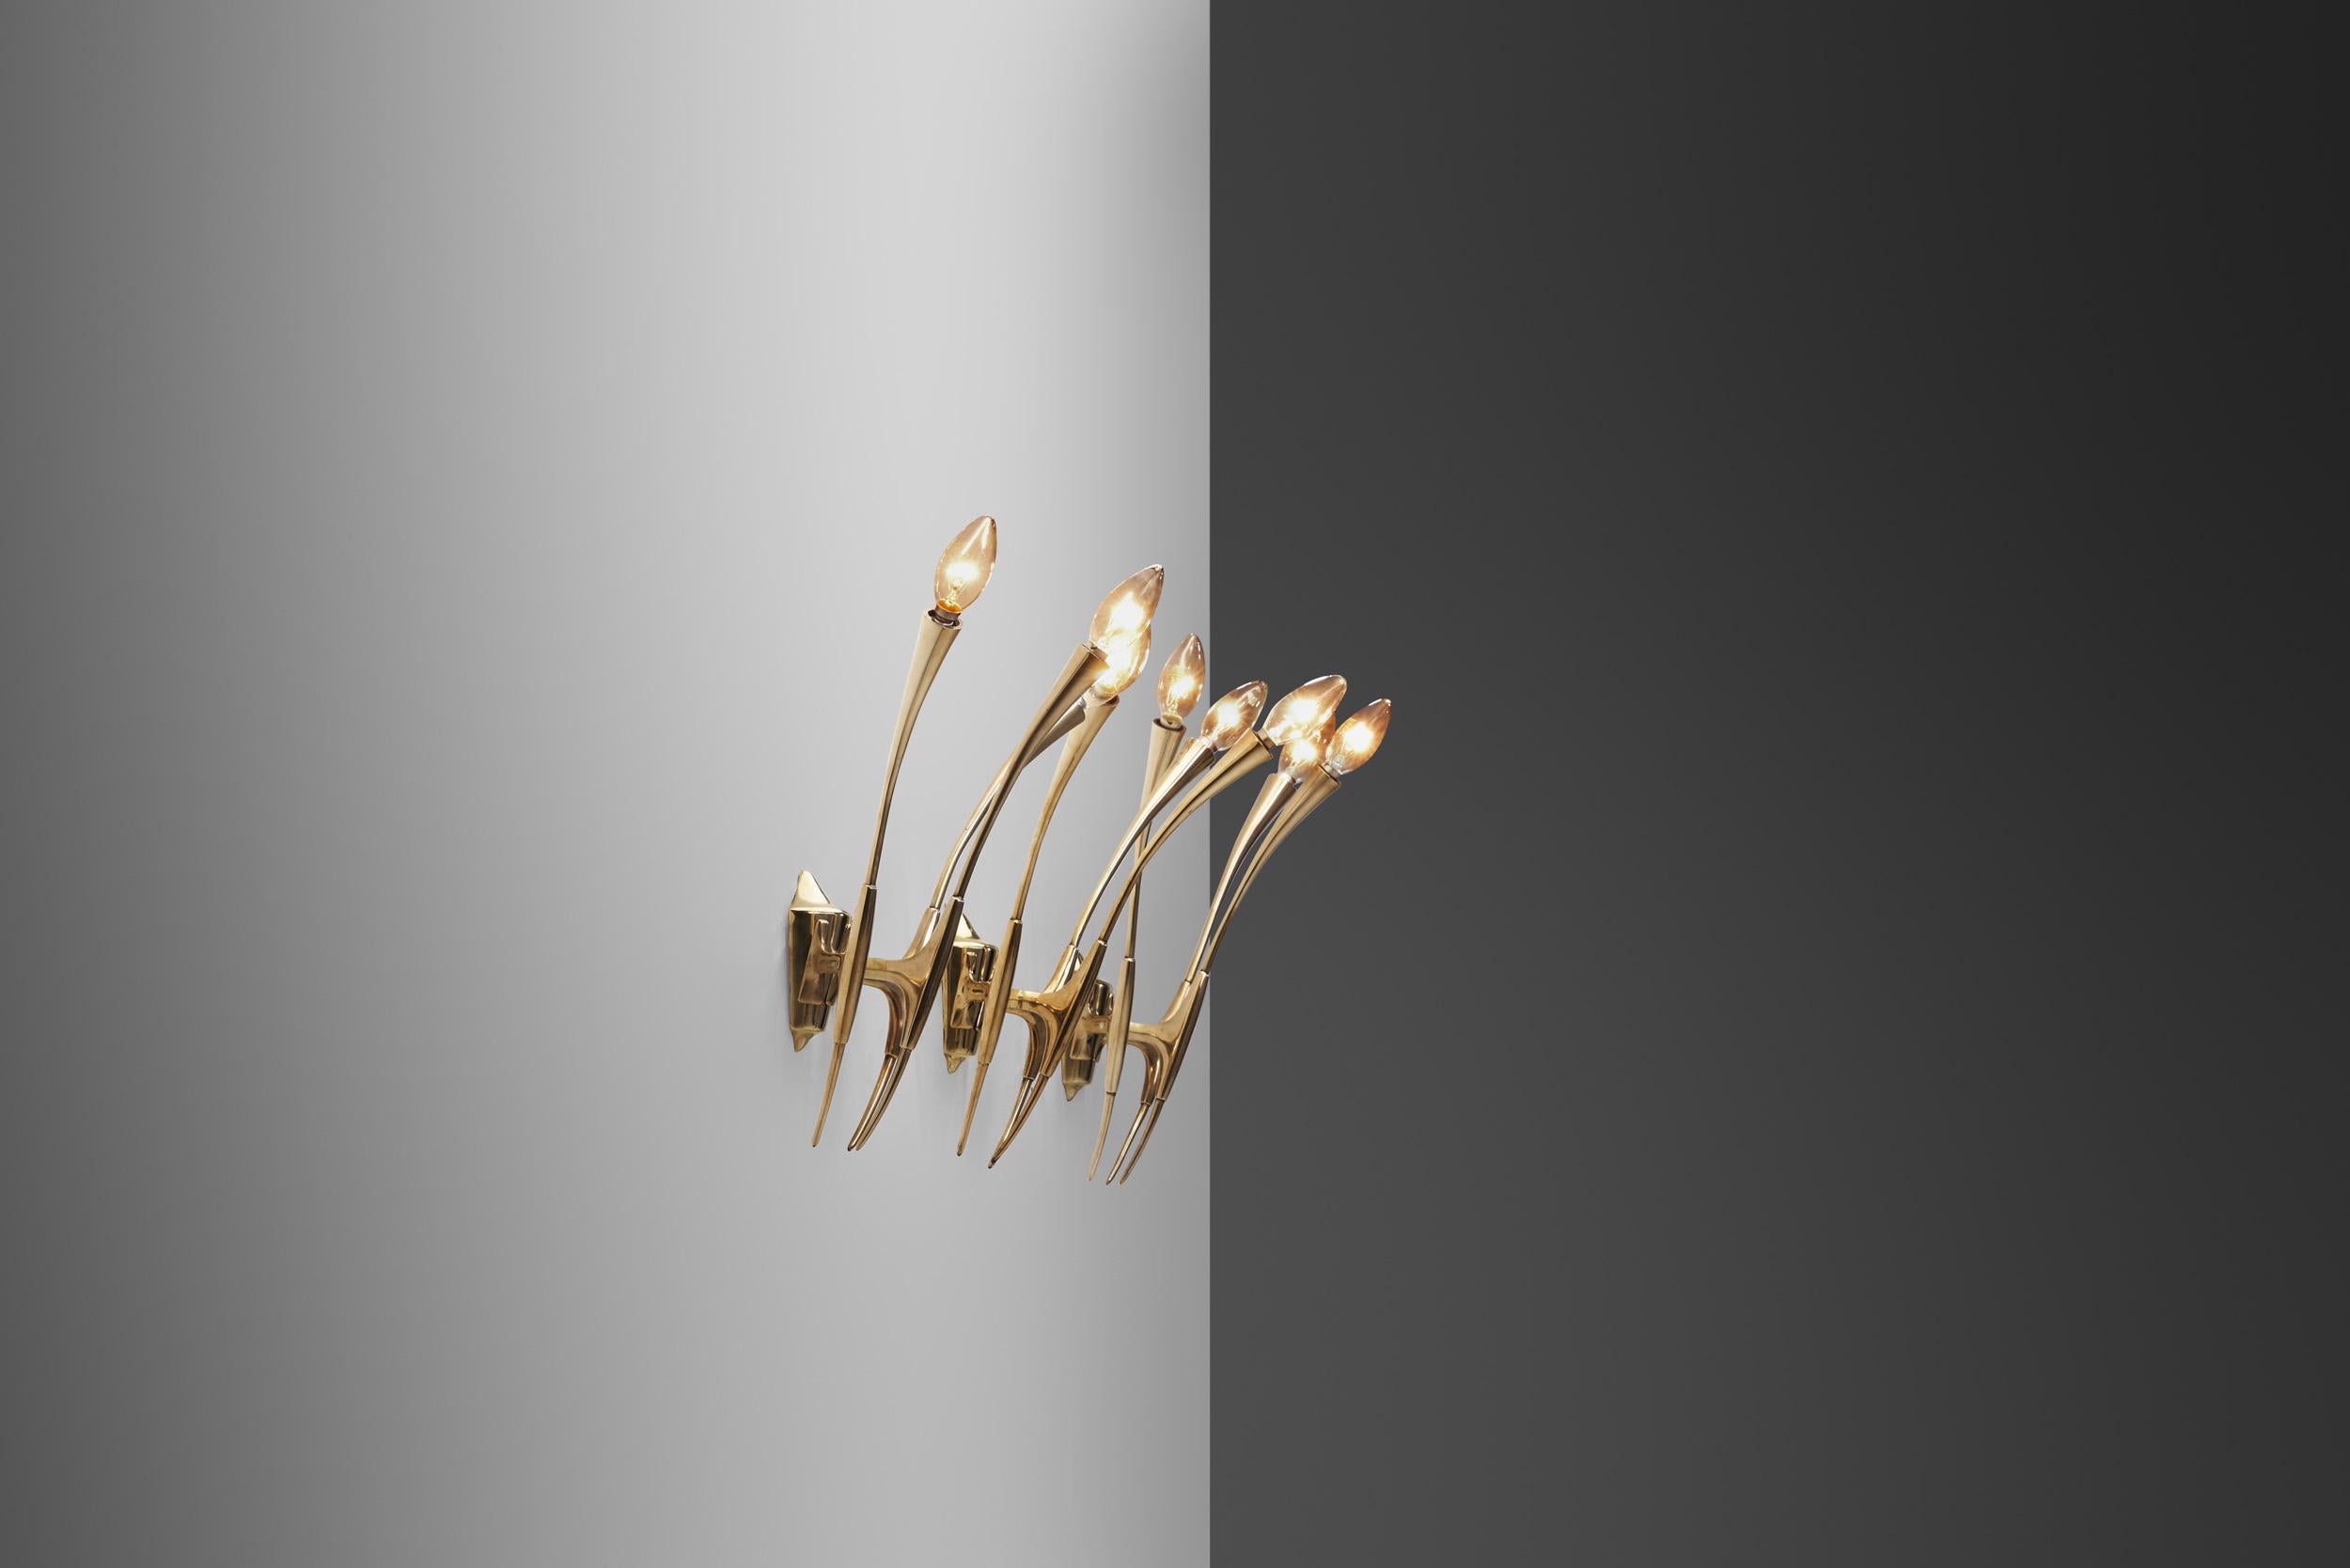 Mid-20th Century Oscar Torlasco Sculptural Brass Wall Lights for Lumi, Italy, 1950s For Sale